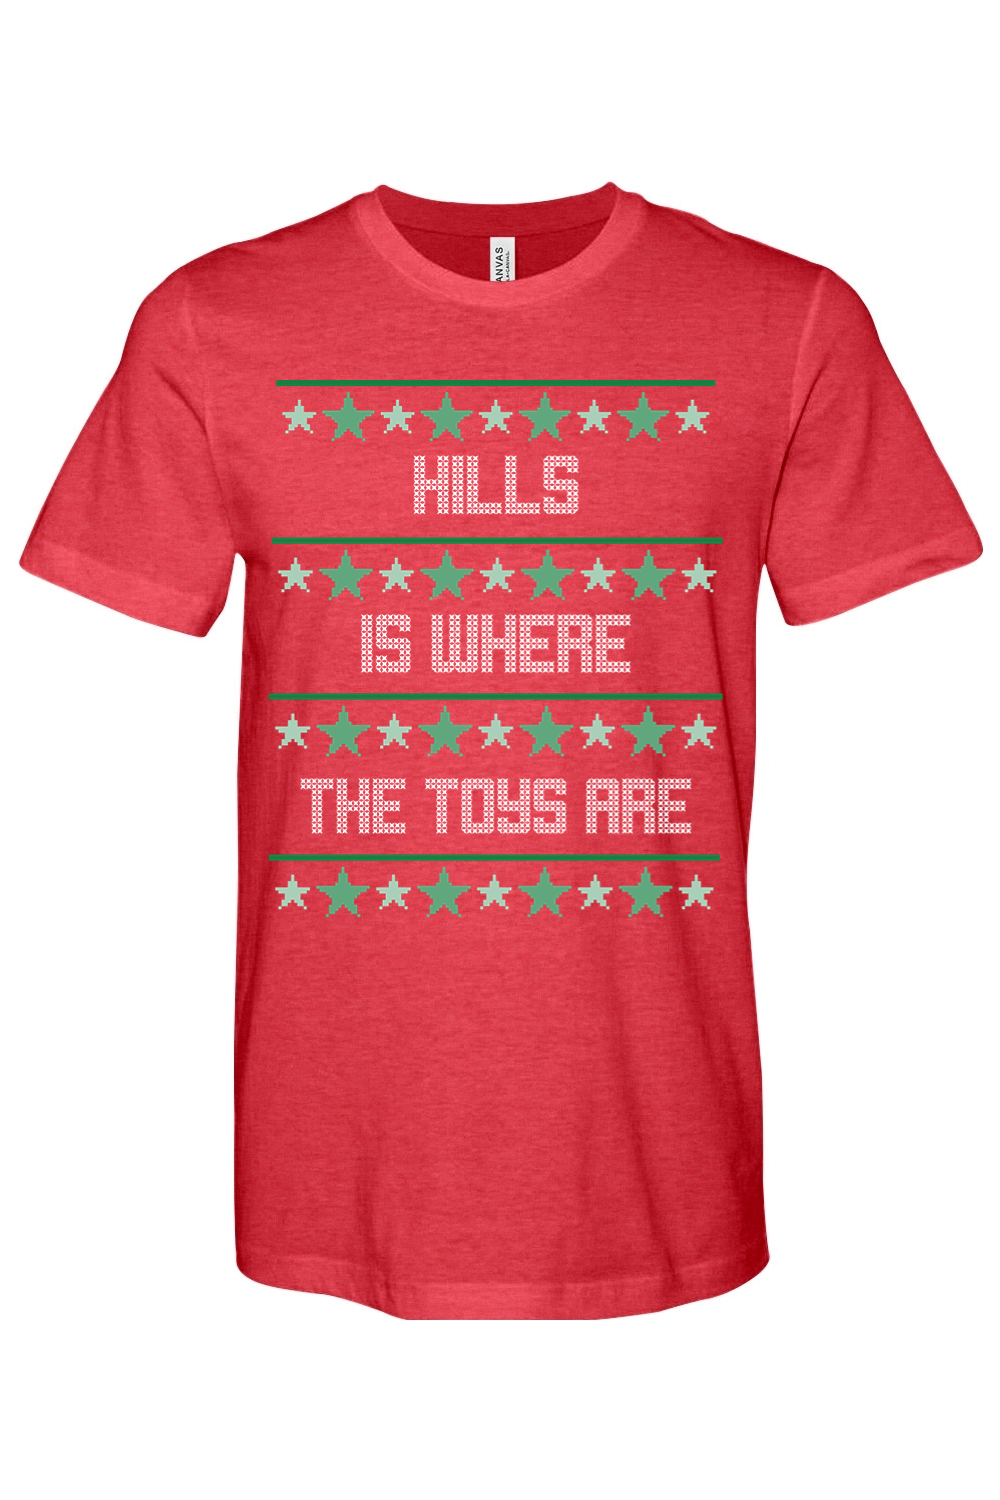 Hills is Where the Toys Are - Ugly Christmas Sweater - Yinzylvania